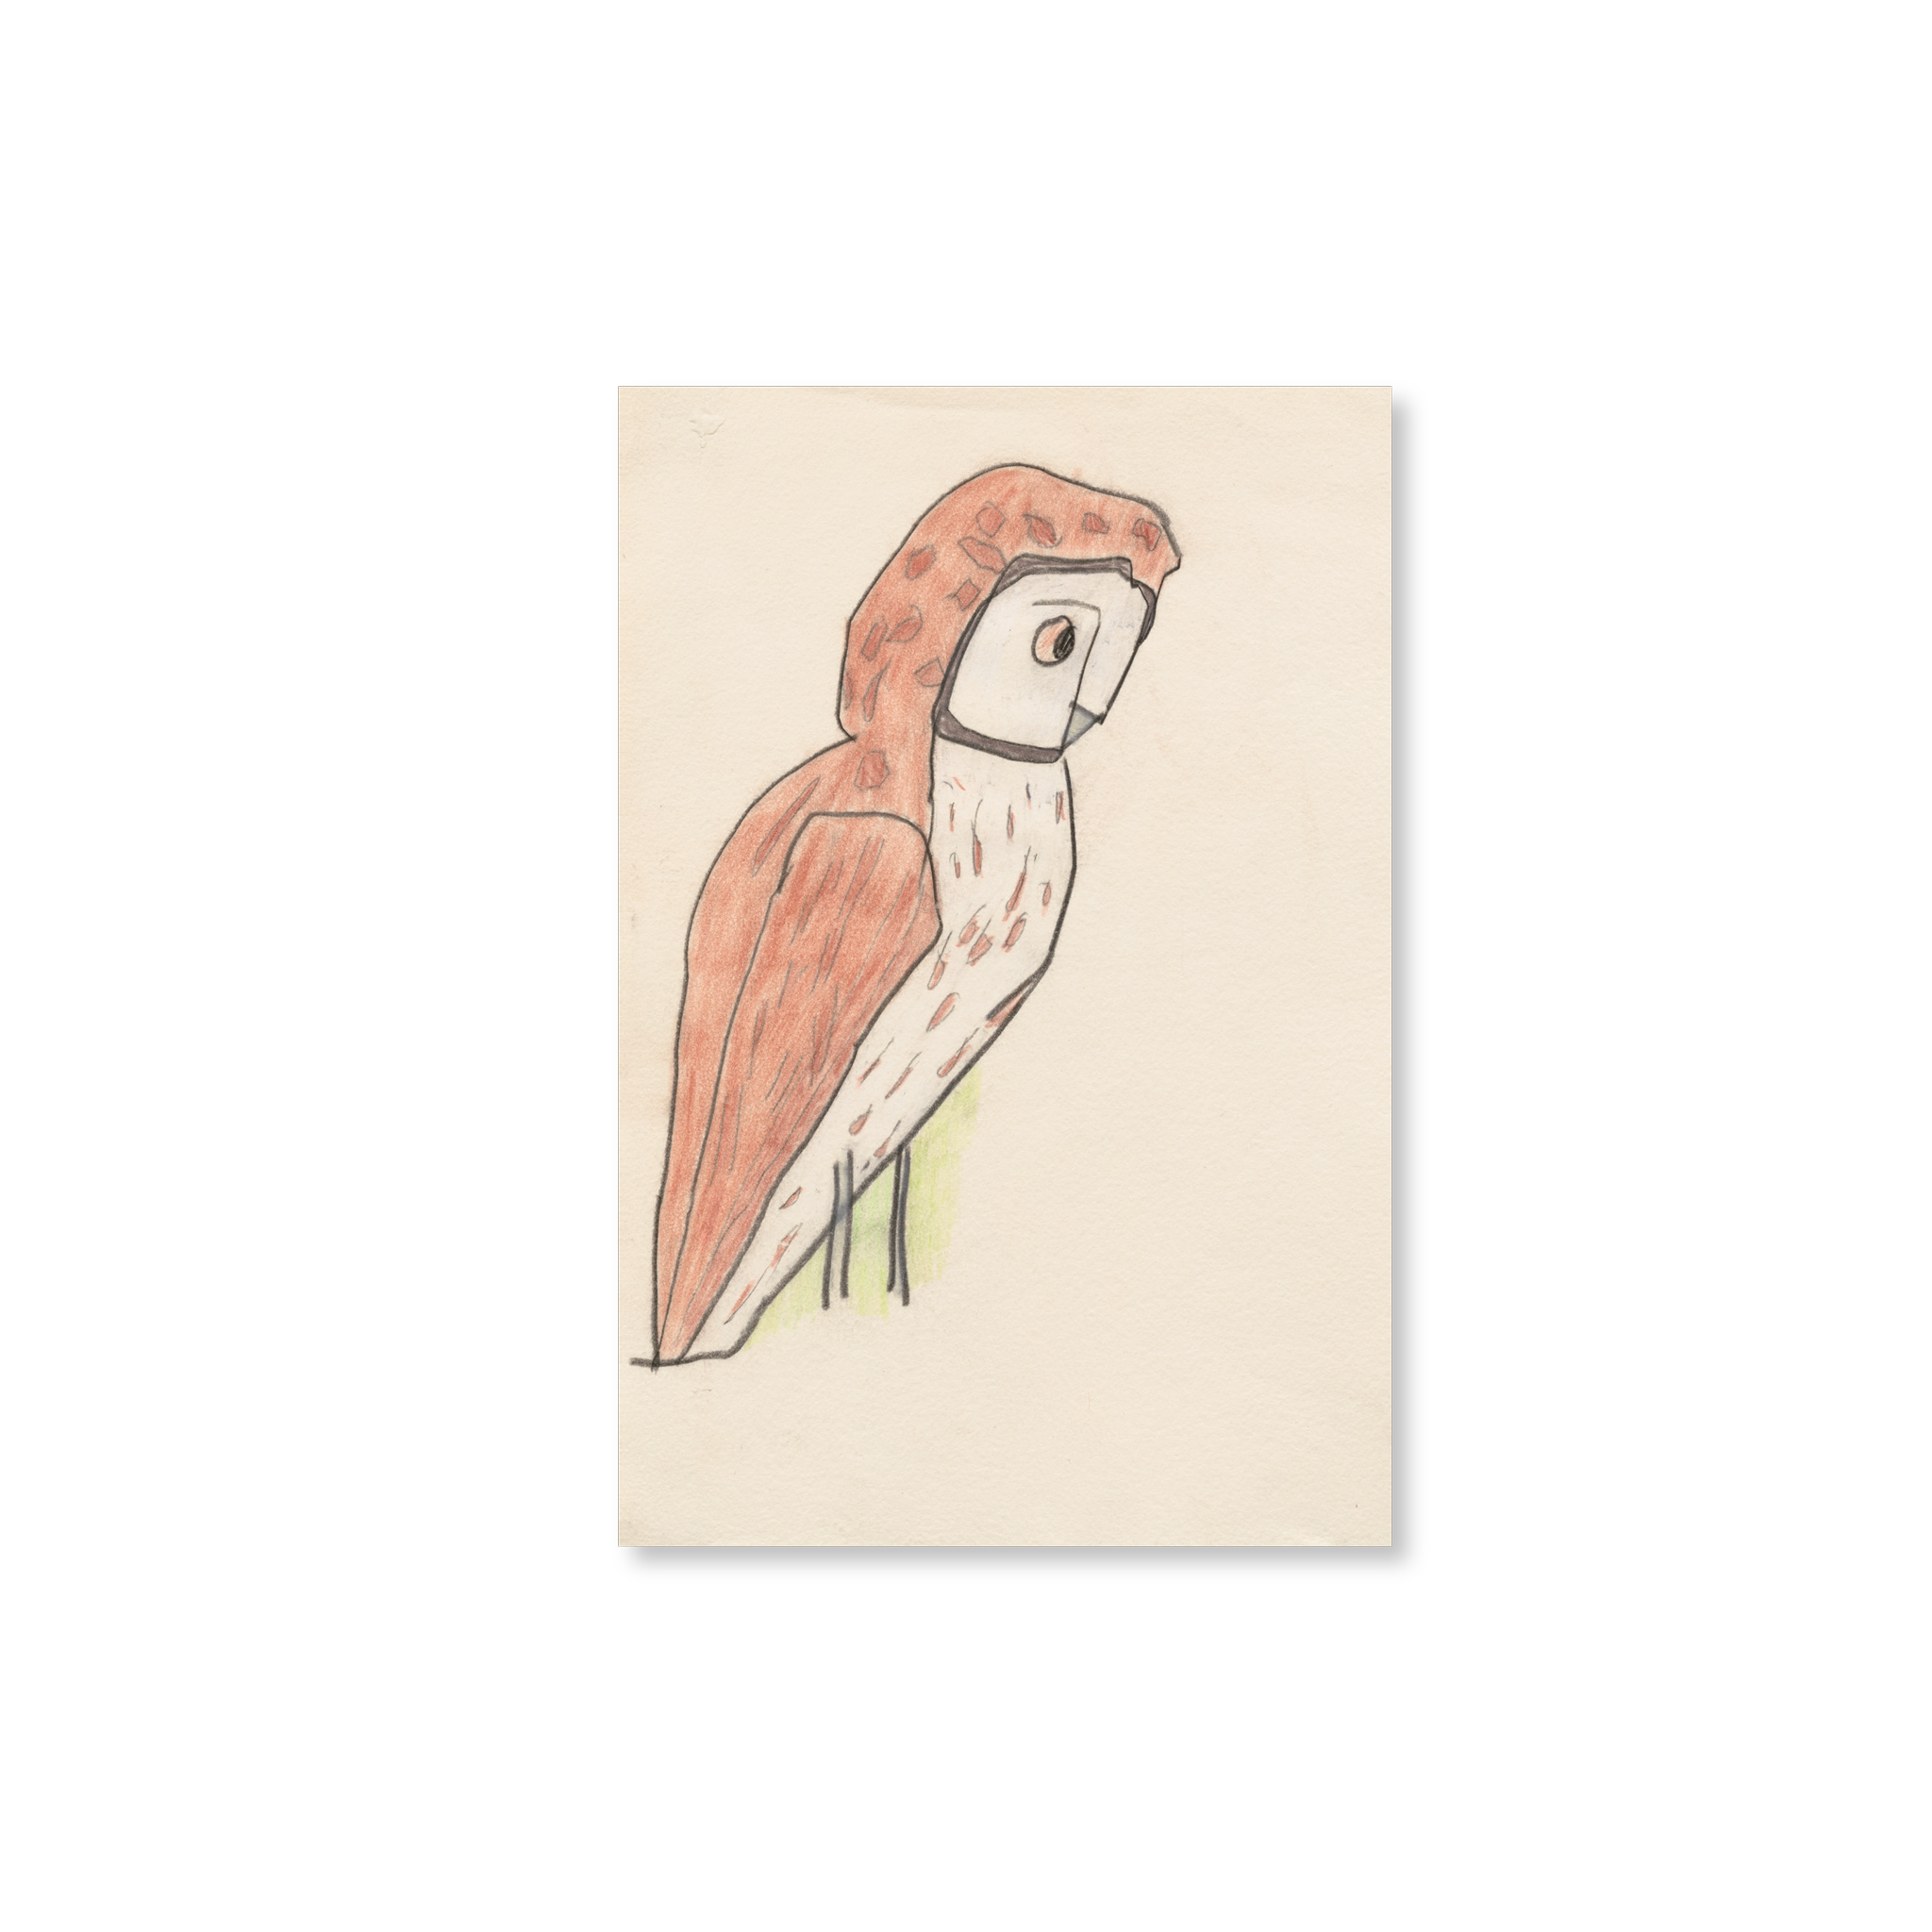 An illustration of an owl. The owl's body is positions sideways from the left of the image. It's body is brown with a white belly. 